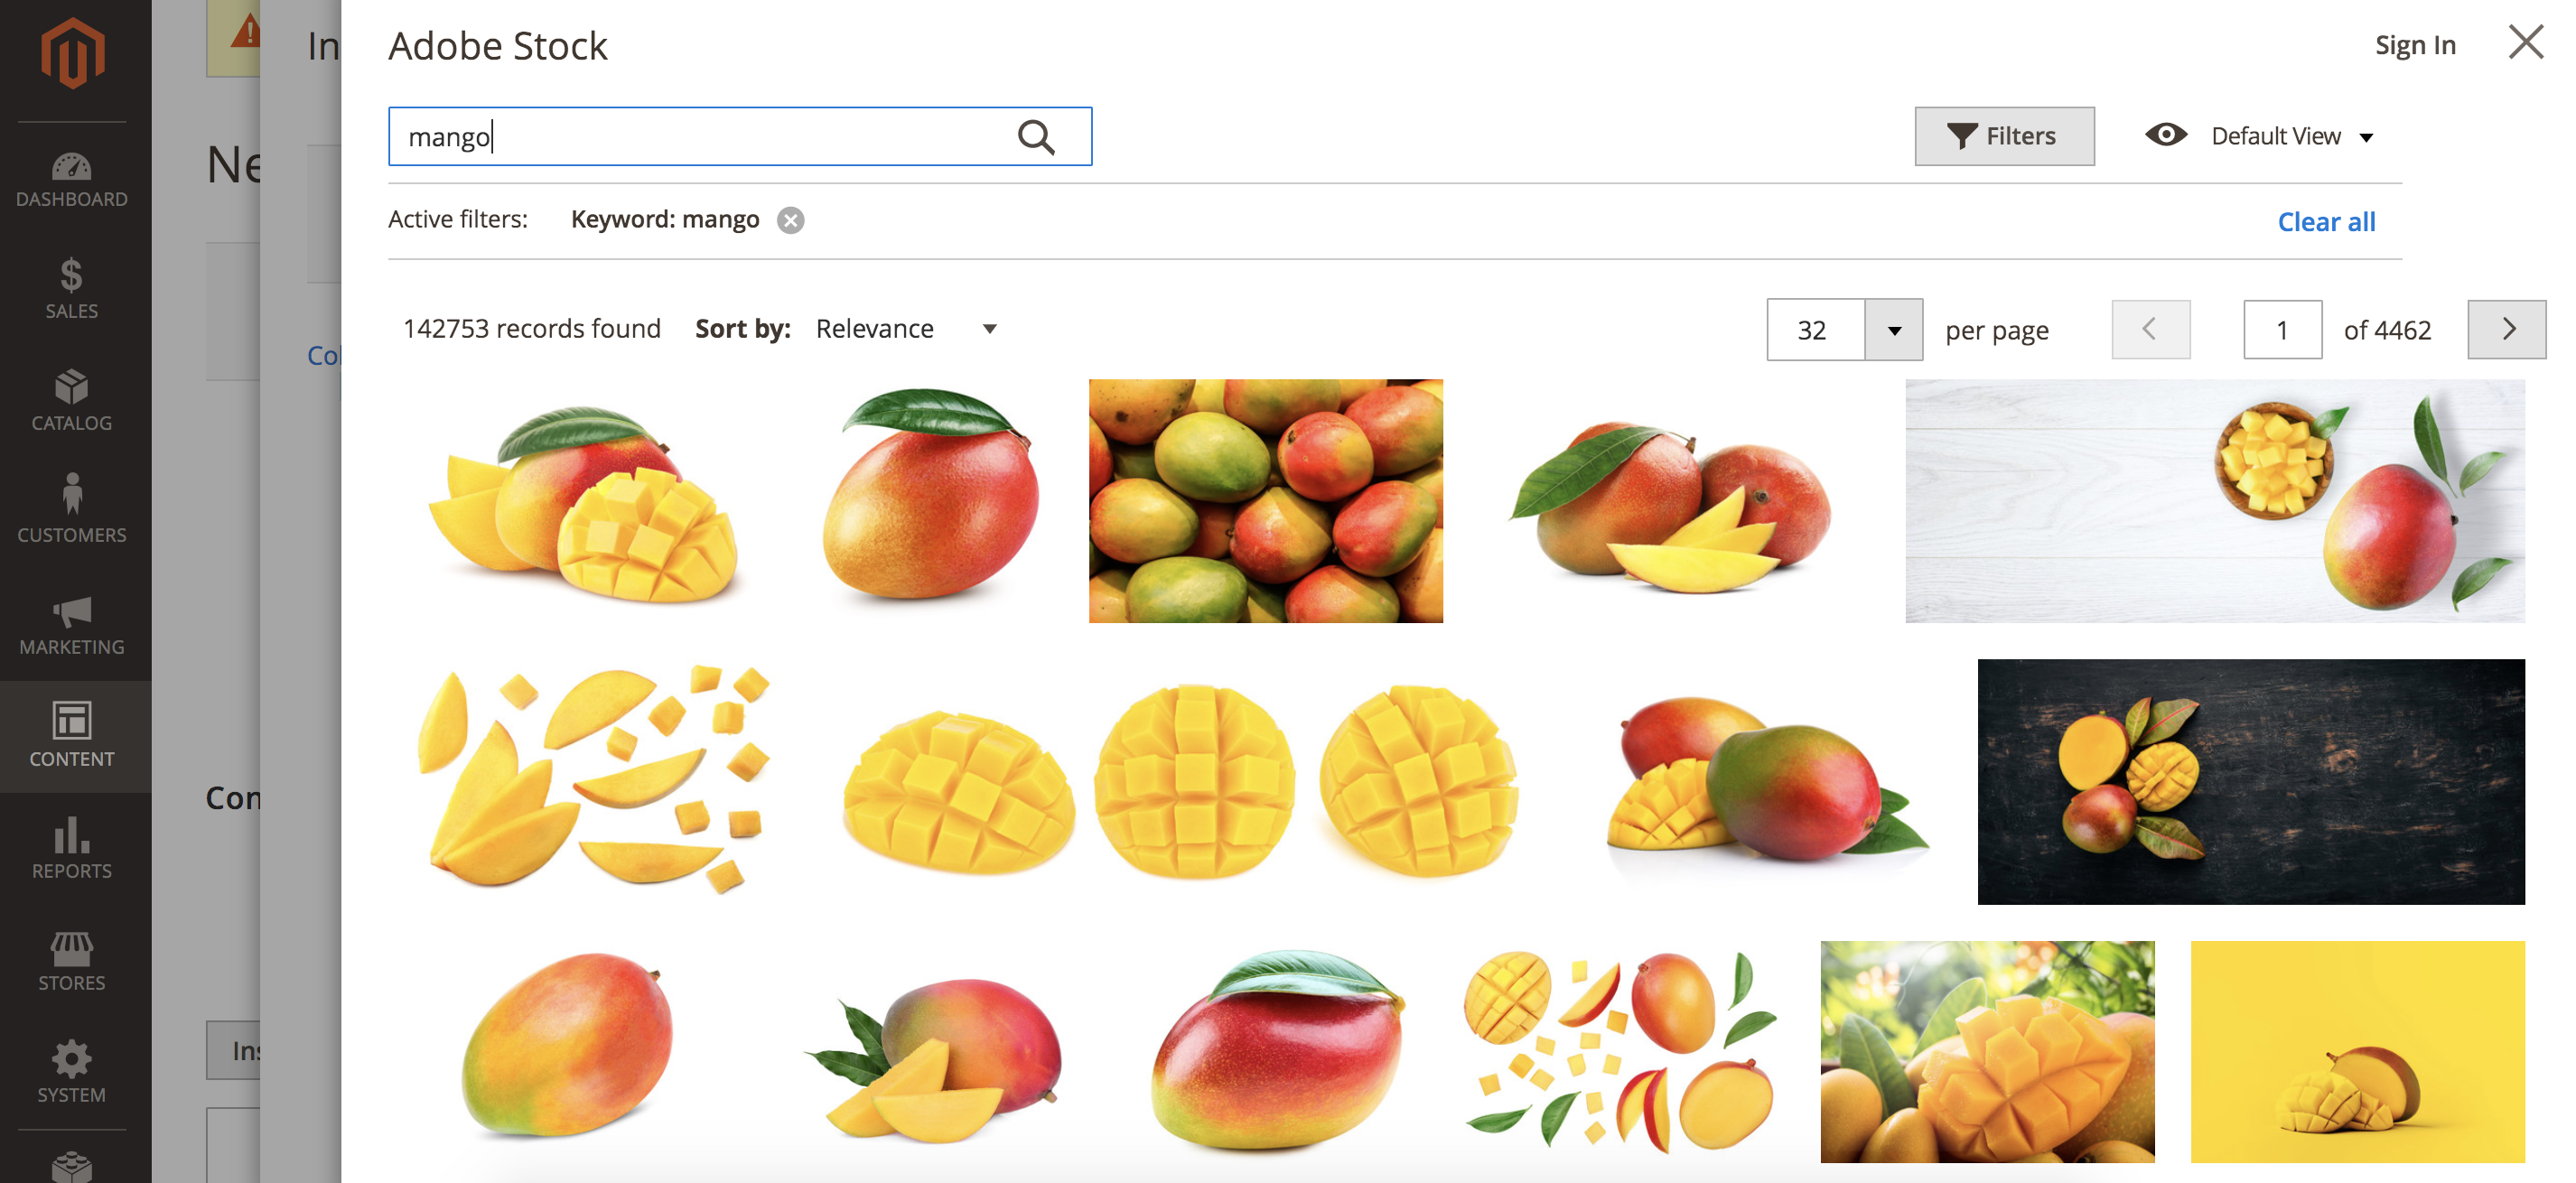 Adobe Stock Search Results for the "mango" keyword